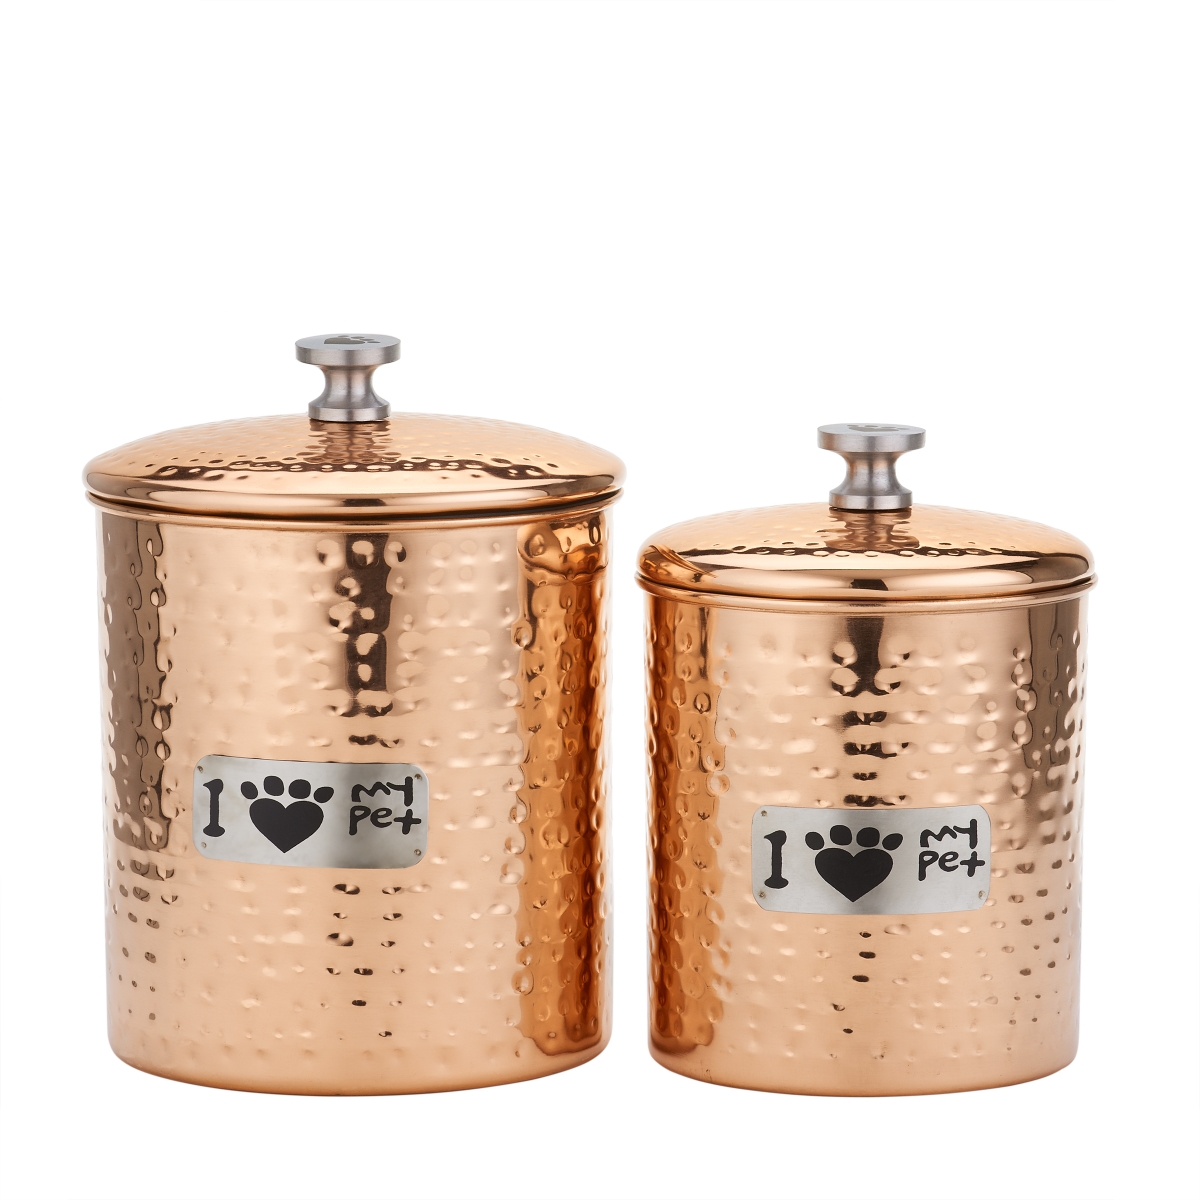 1444cp 3.75 & 2.25 Qt. Hammered Cat Paw Pet Canister Set, Copper - 2 Piece